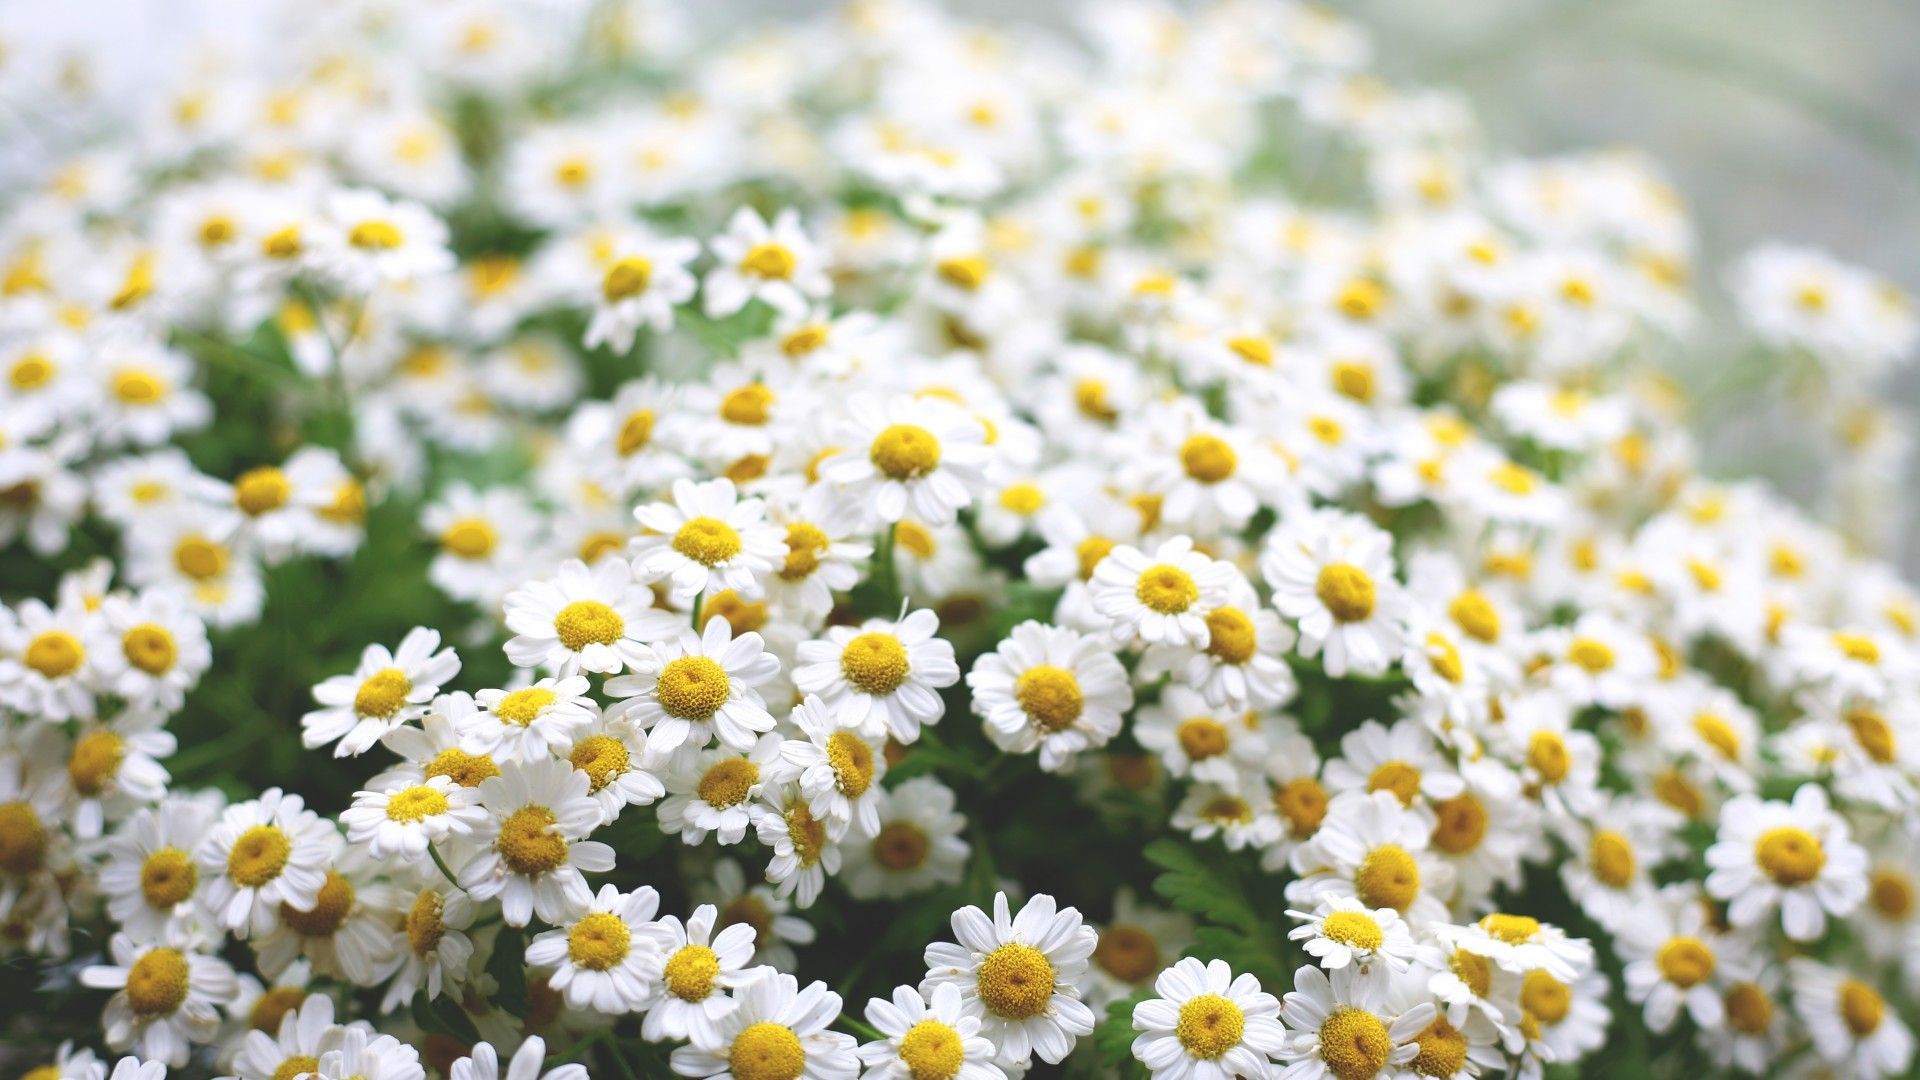 Field of daisies wallpaper and image, picture, photo